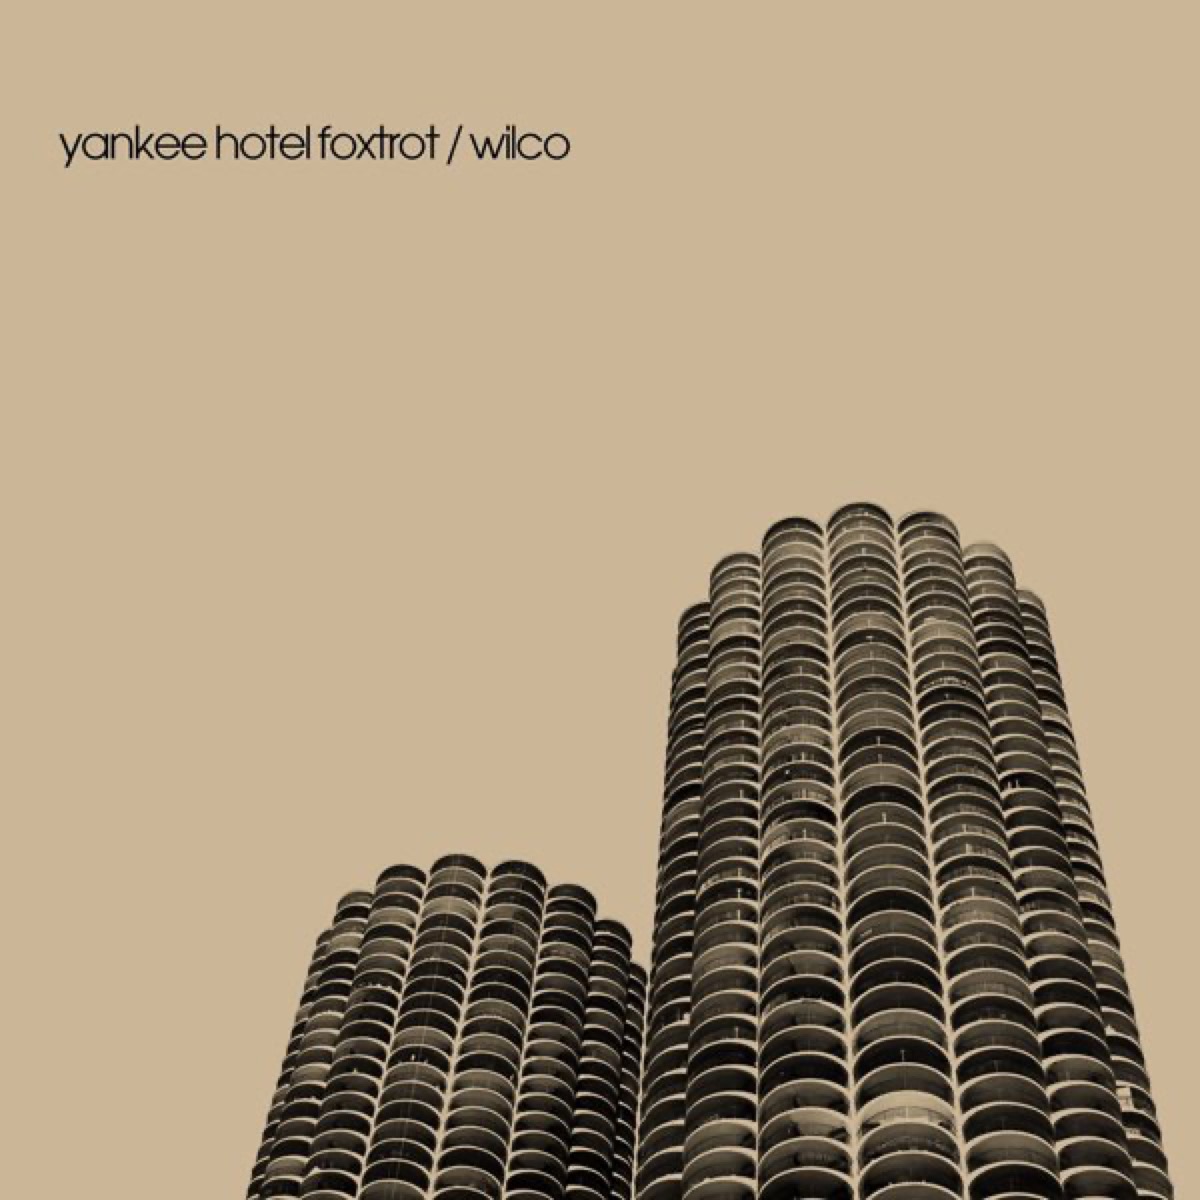 "Yankee Hotel Foxtrot" by Wilco album cover